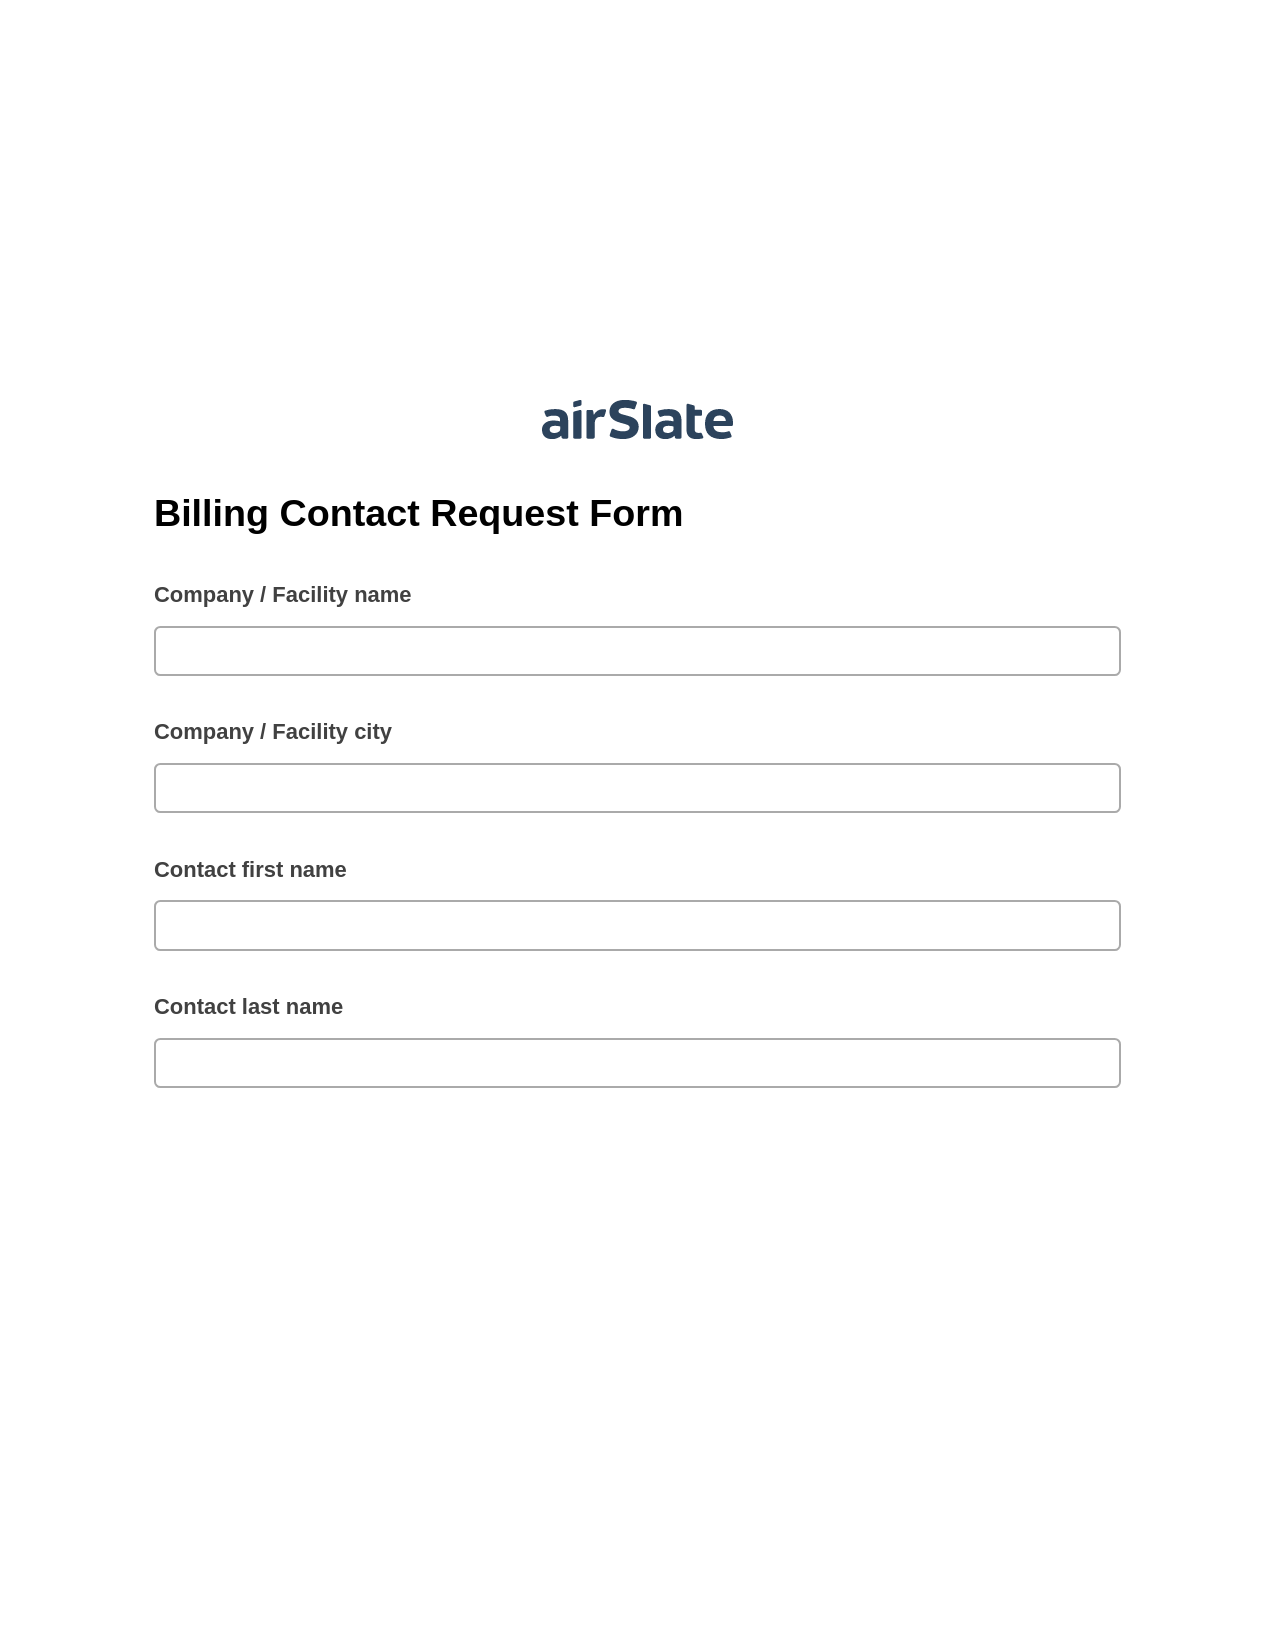 Multirole Billing Contact Request Form Pre-fill from CSV File Bot, Hide Signatures Bot, Slack Two-Way Binding Bot